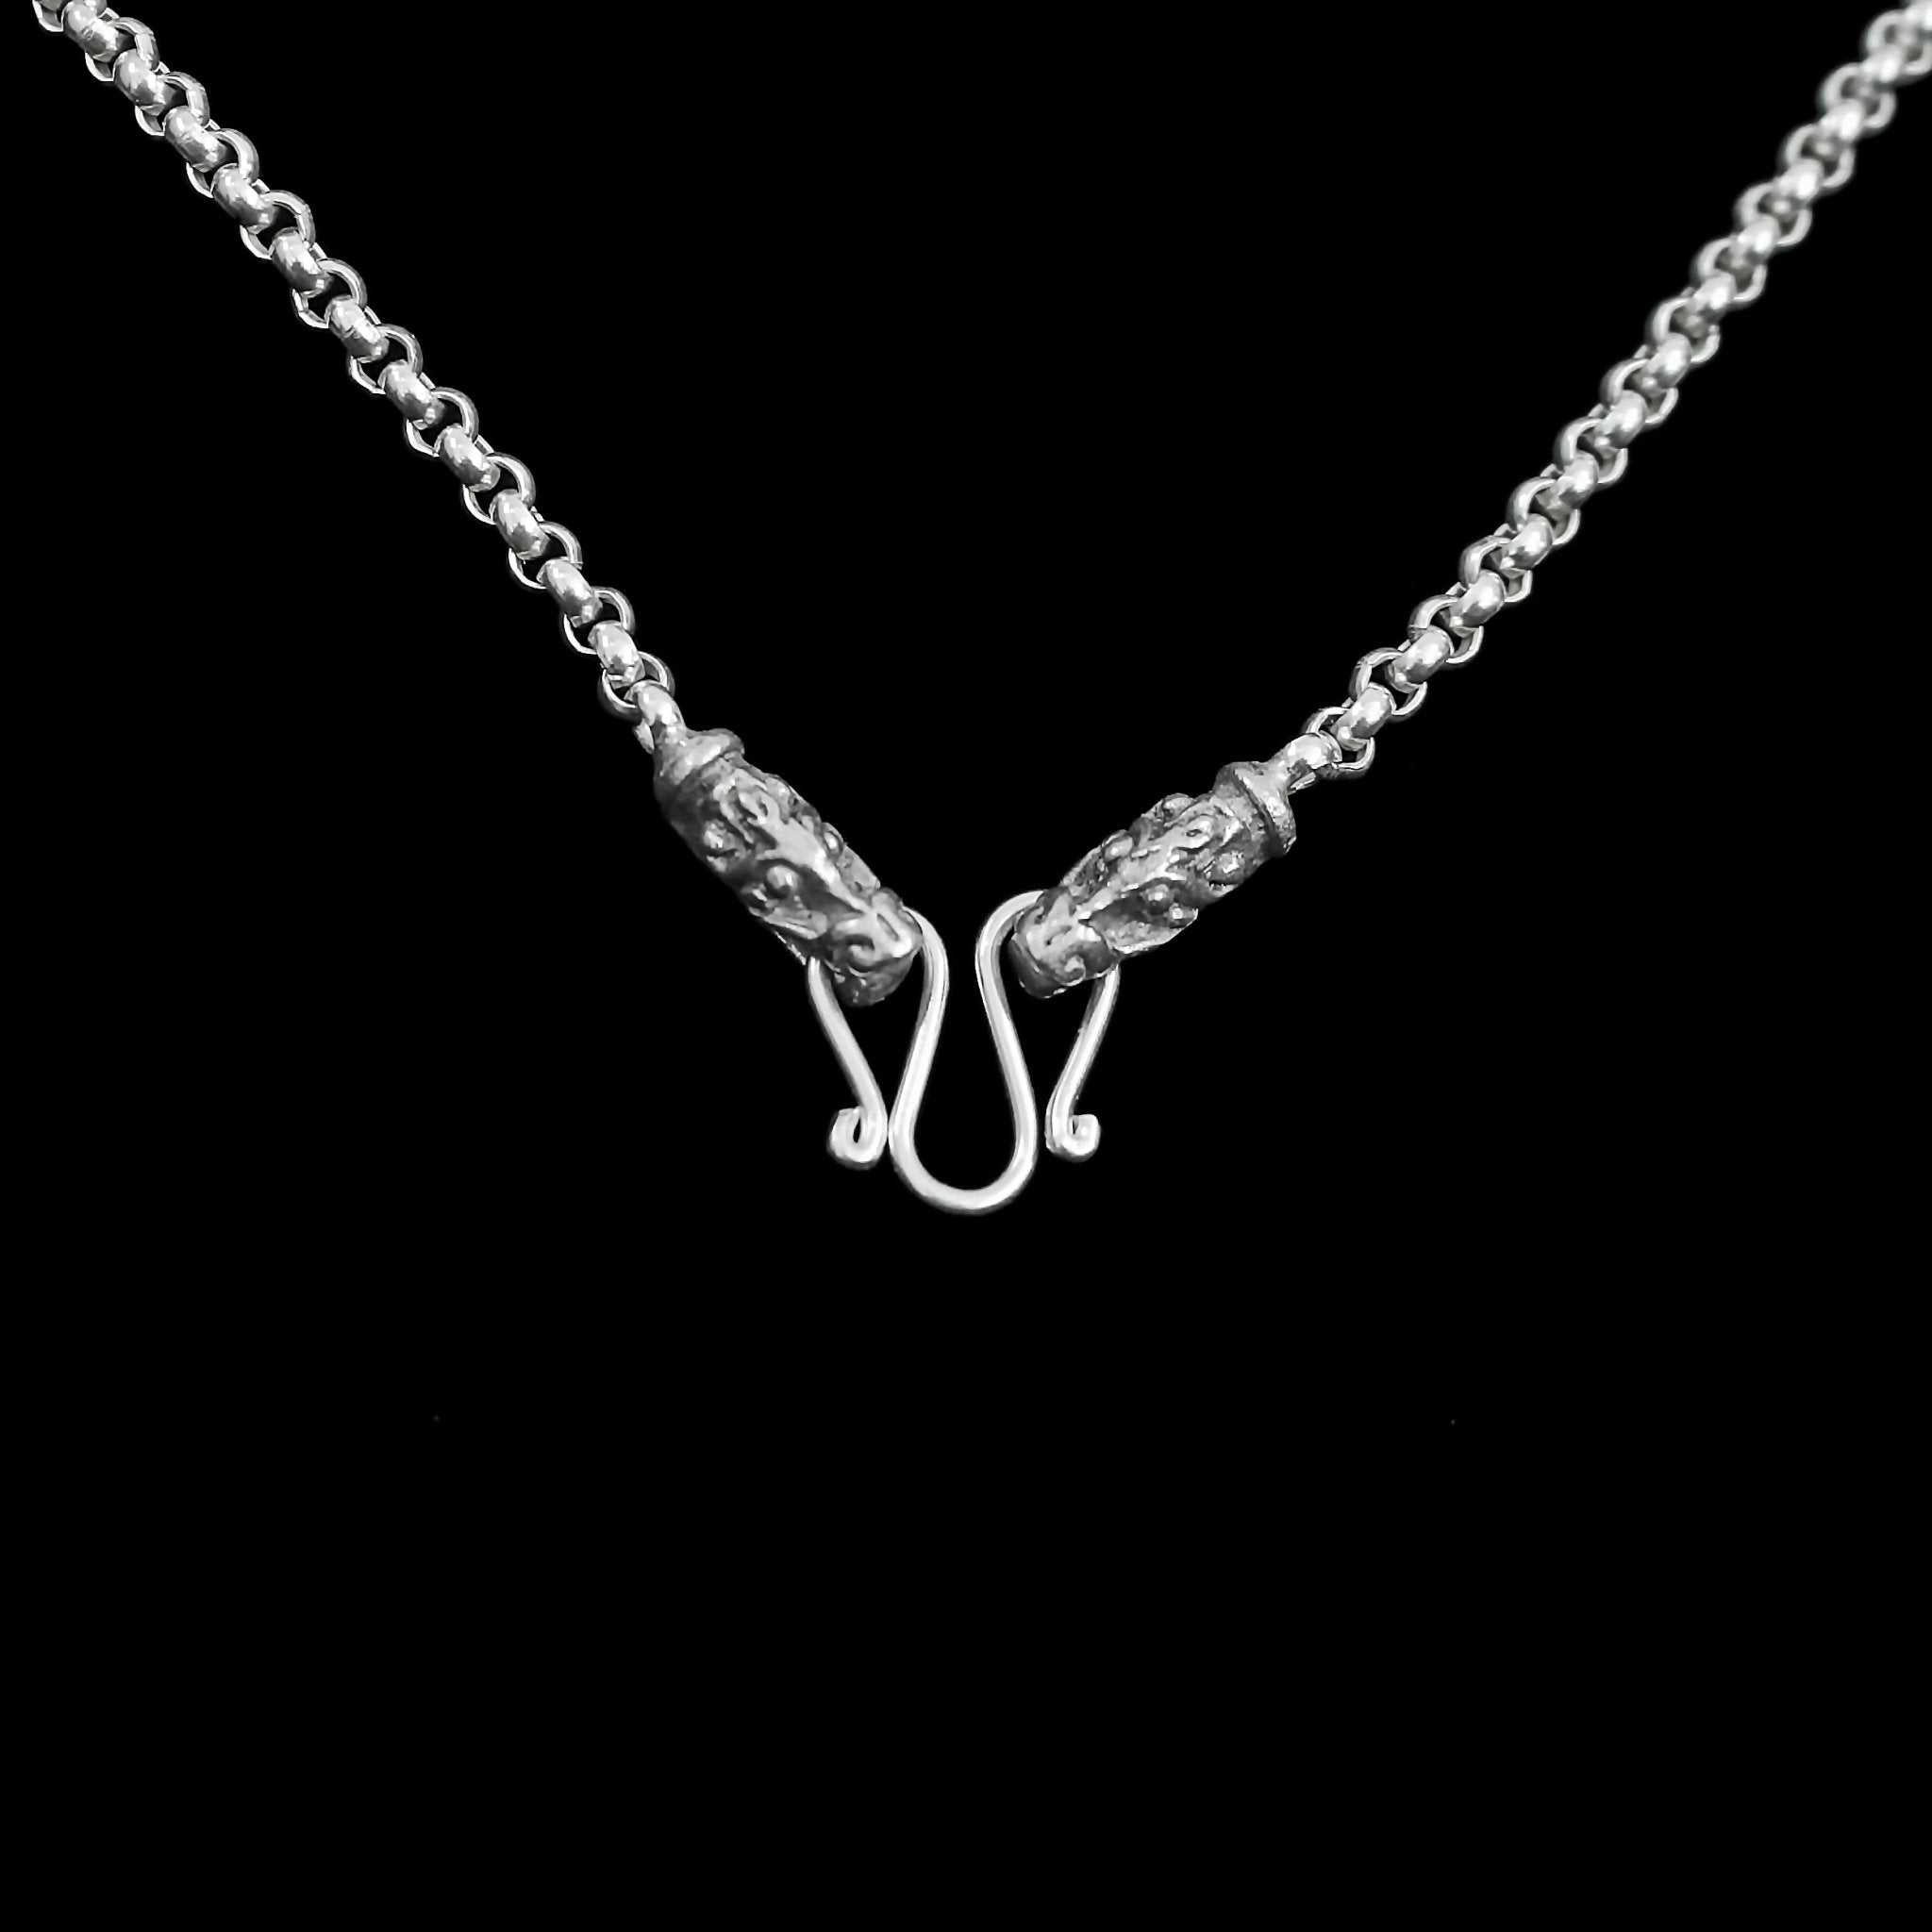 Slim Silver Anchor Chain Pendant Necklace with Gotland Dragon Heads